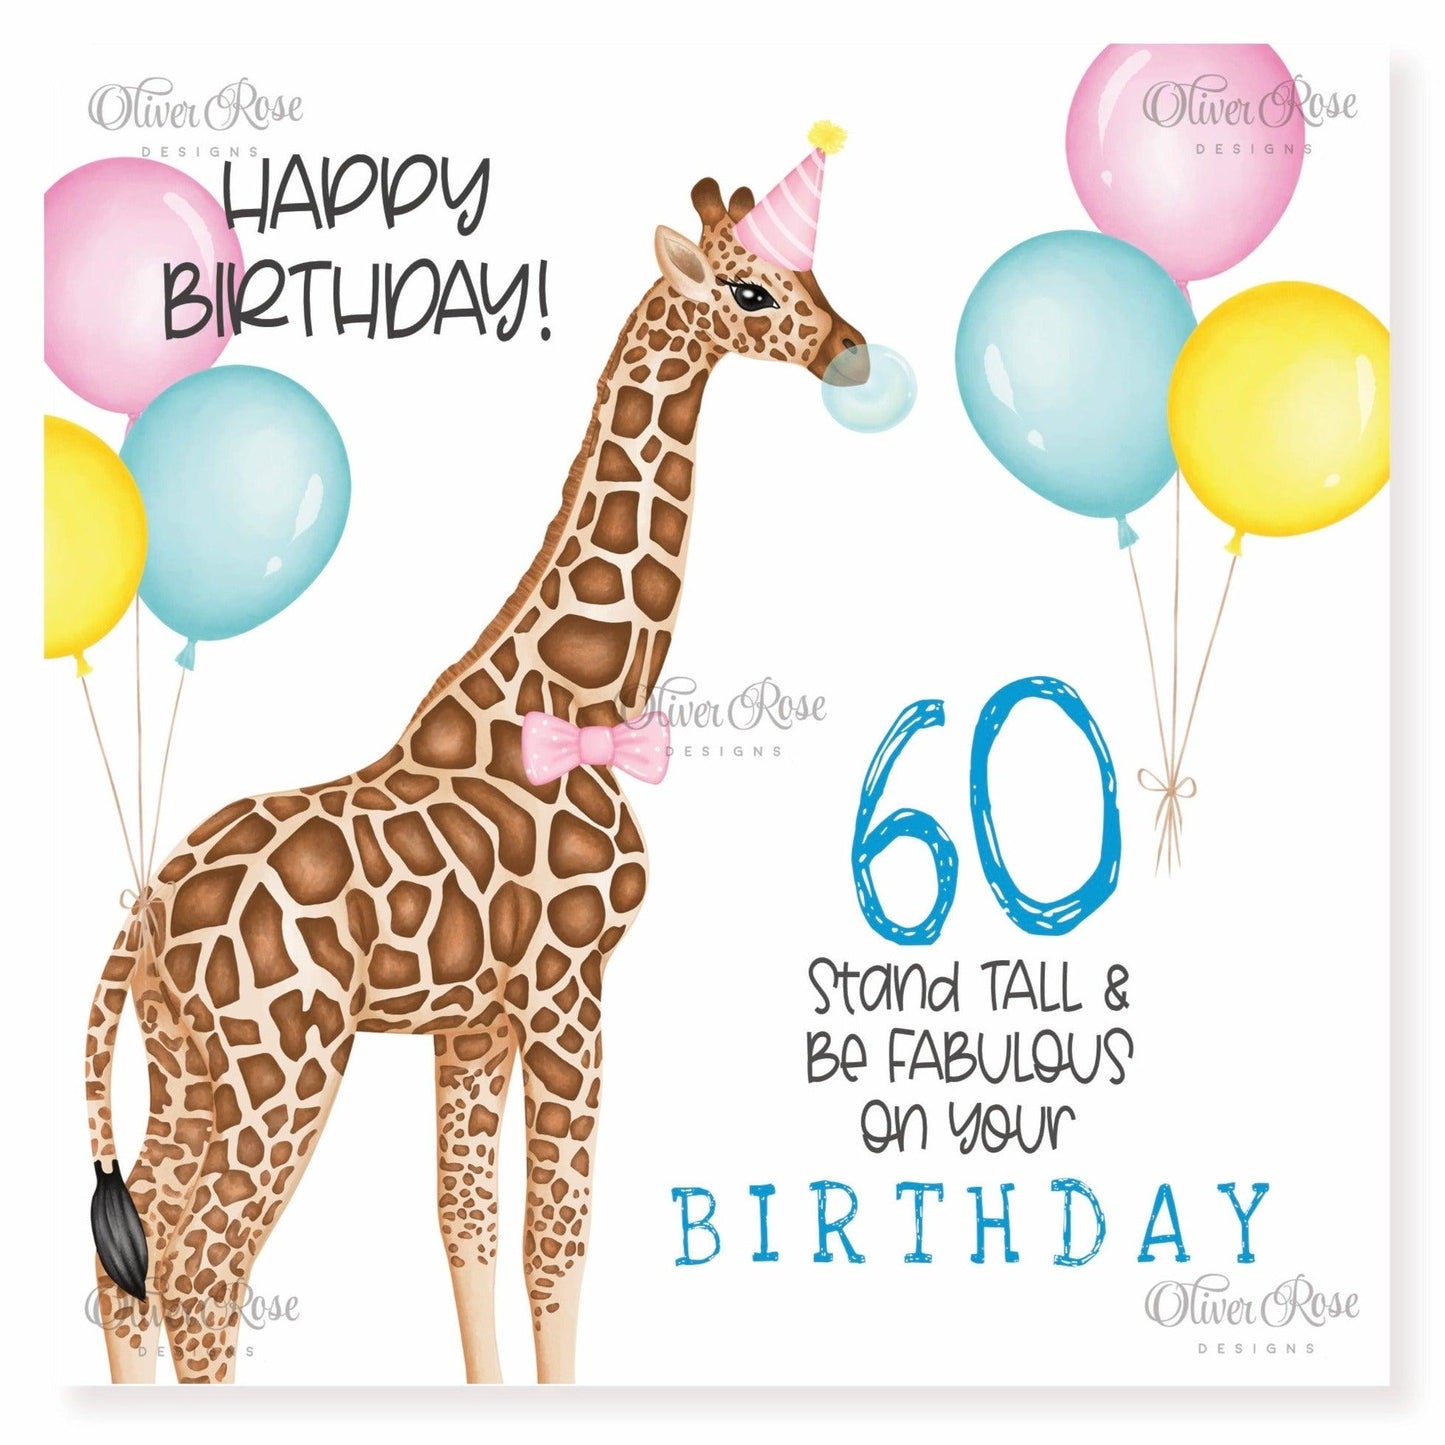 Giraffe Birthday Card, 60 [Any Age] Stand Tall & Be Fabulous On Your Birthday. Pastel Pink, Yellow & Blue Balloons. Happy Birthday. Giraffe wearing a Pink Party Hat, Pink Bow Tie & Blowing a Bubble with a Blue Bubblegum. 5.75" Square. Blank Inside